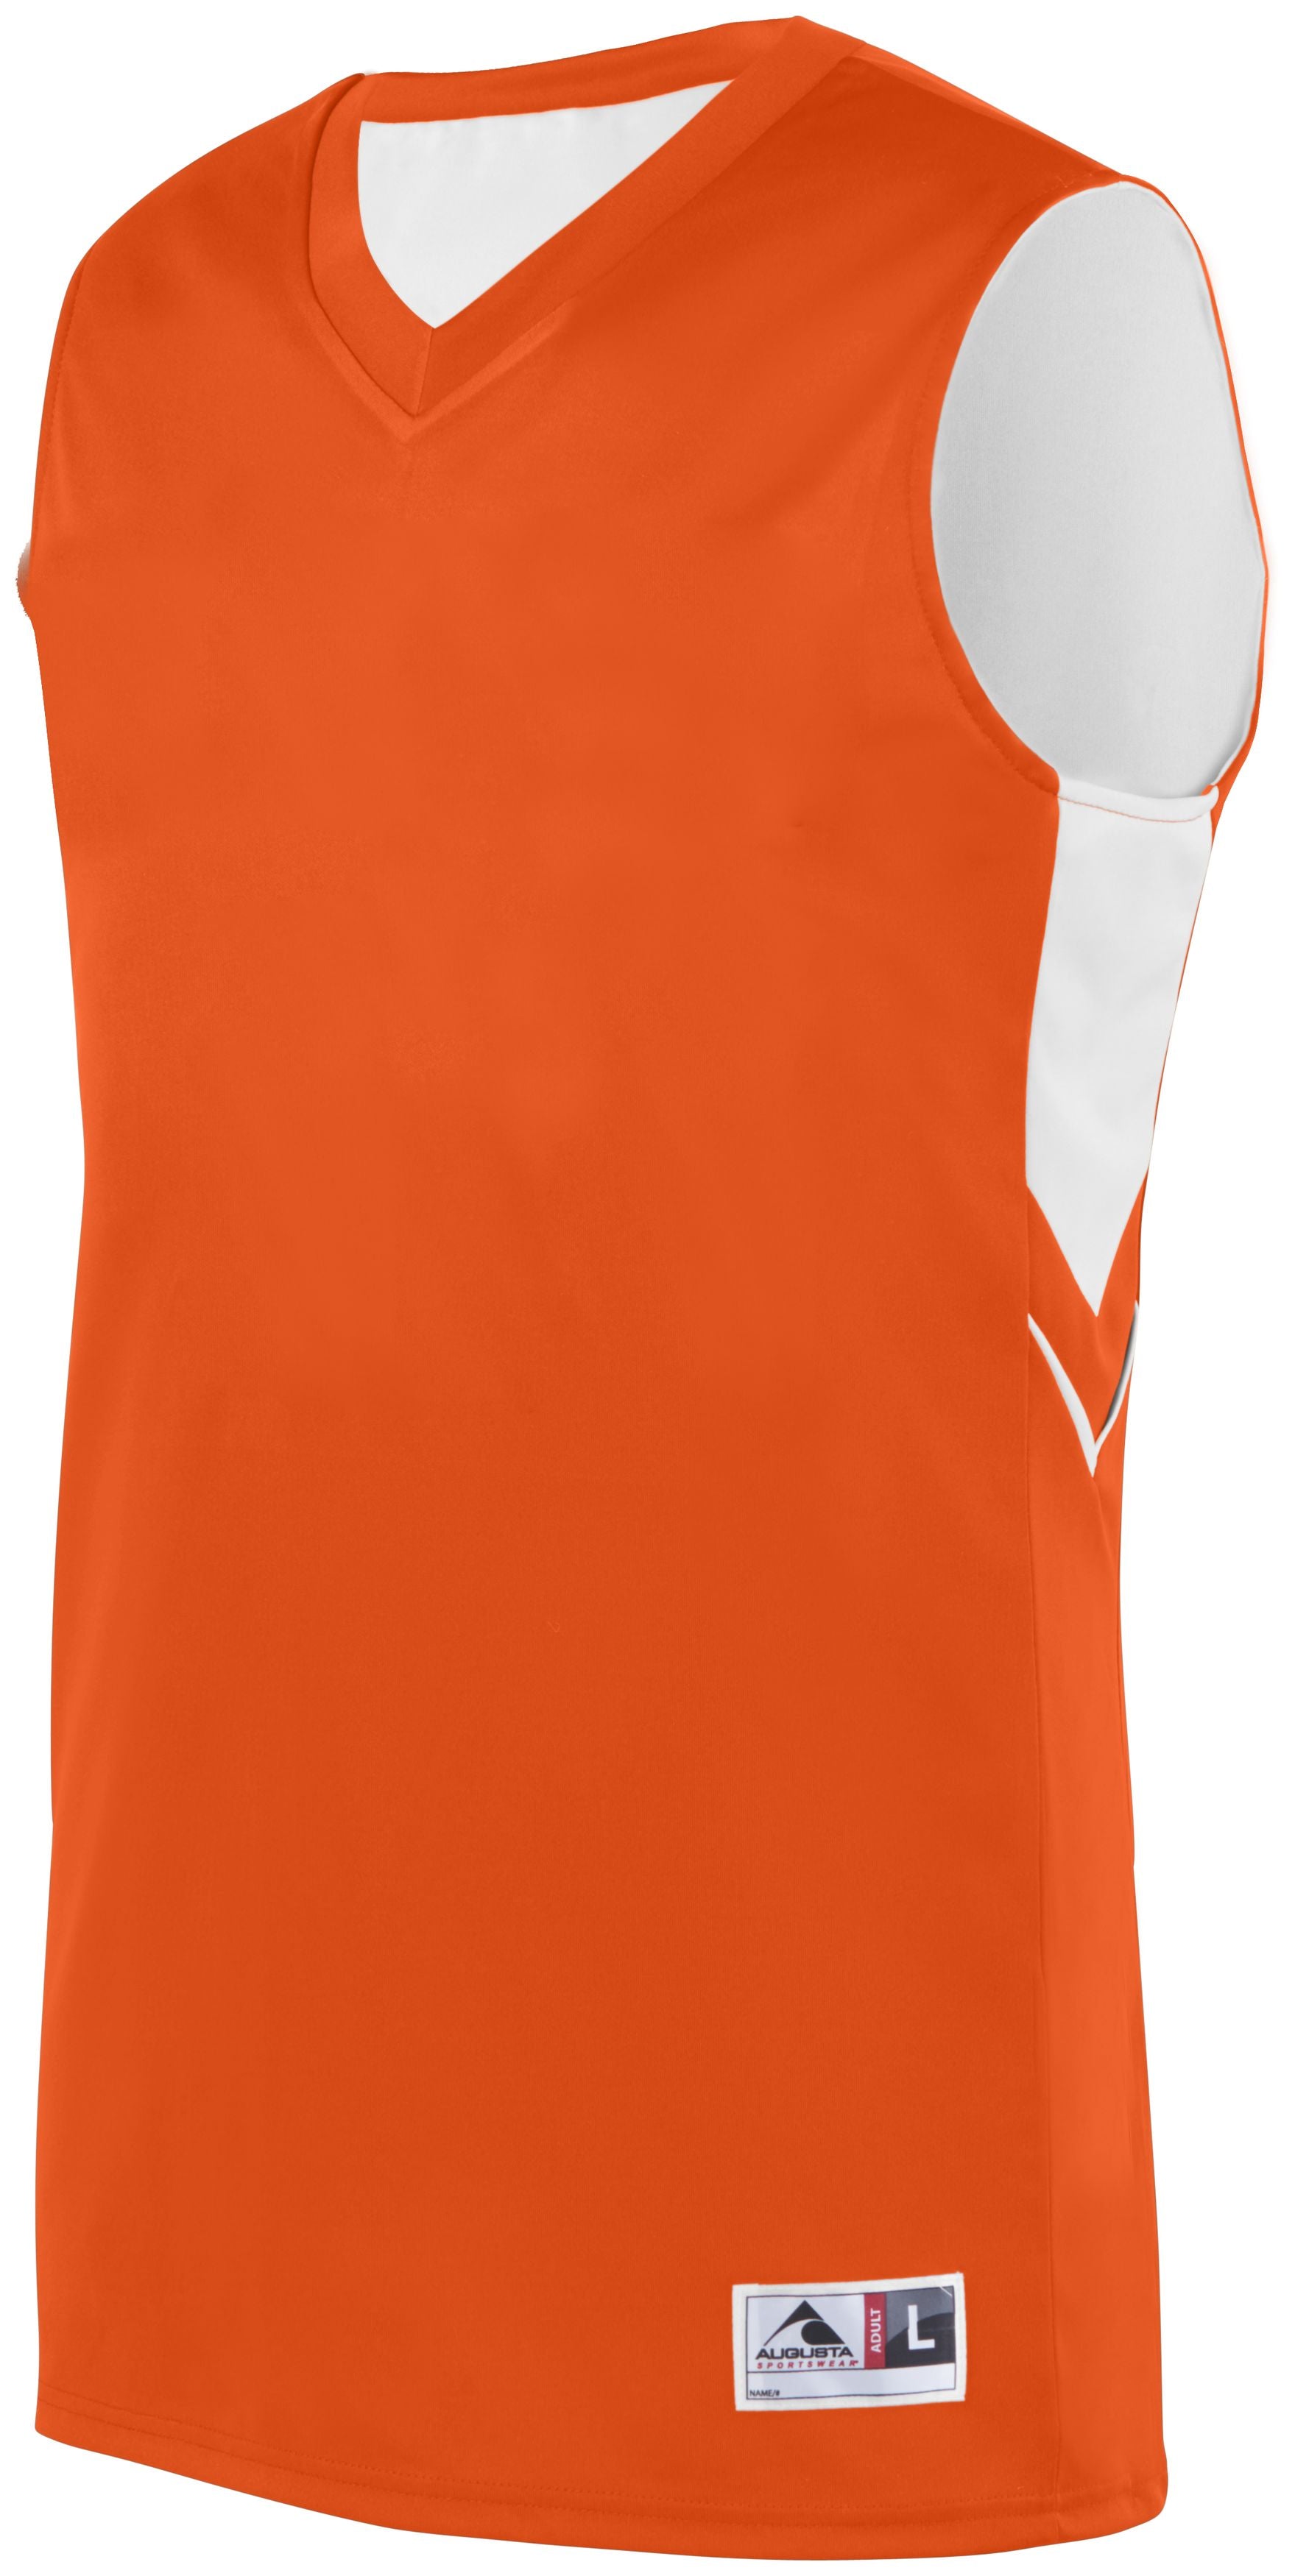 Augusta Sportswear Youth Alley-Oop Reversible Jersey in Orange/White  -Part of the Youth, Youth-Jersey, Augusta-Products, Basketball, Shirts, All-Sports, All-Sports-1 product lines at KanaleyCreations.com